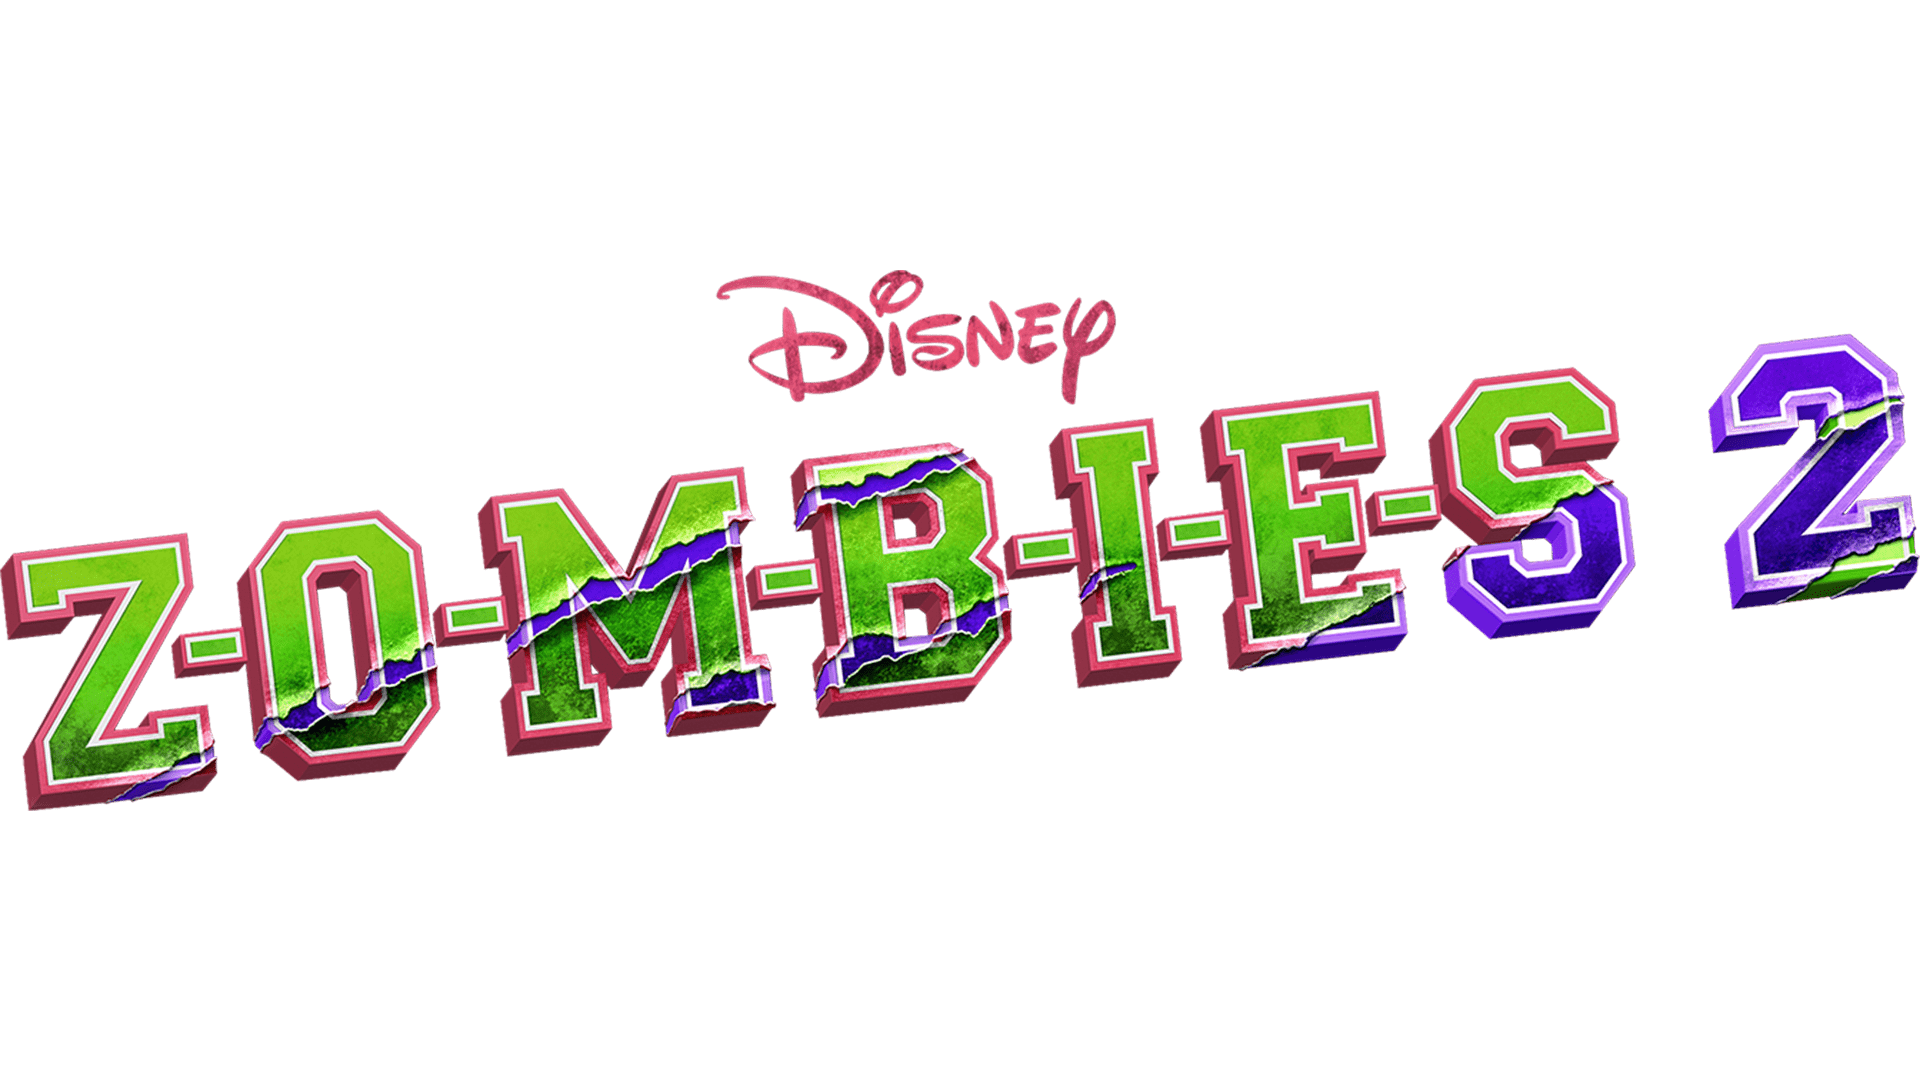 When Is Zombies 2 Coming to Disney+?